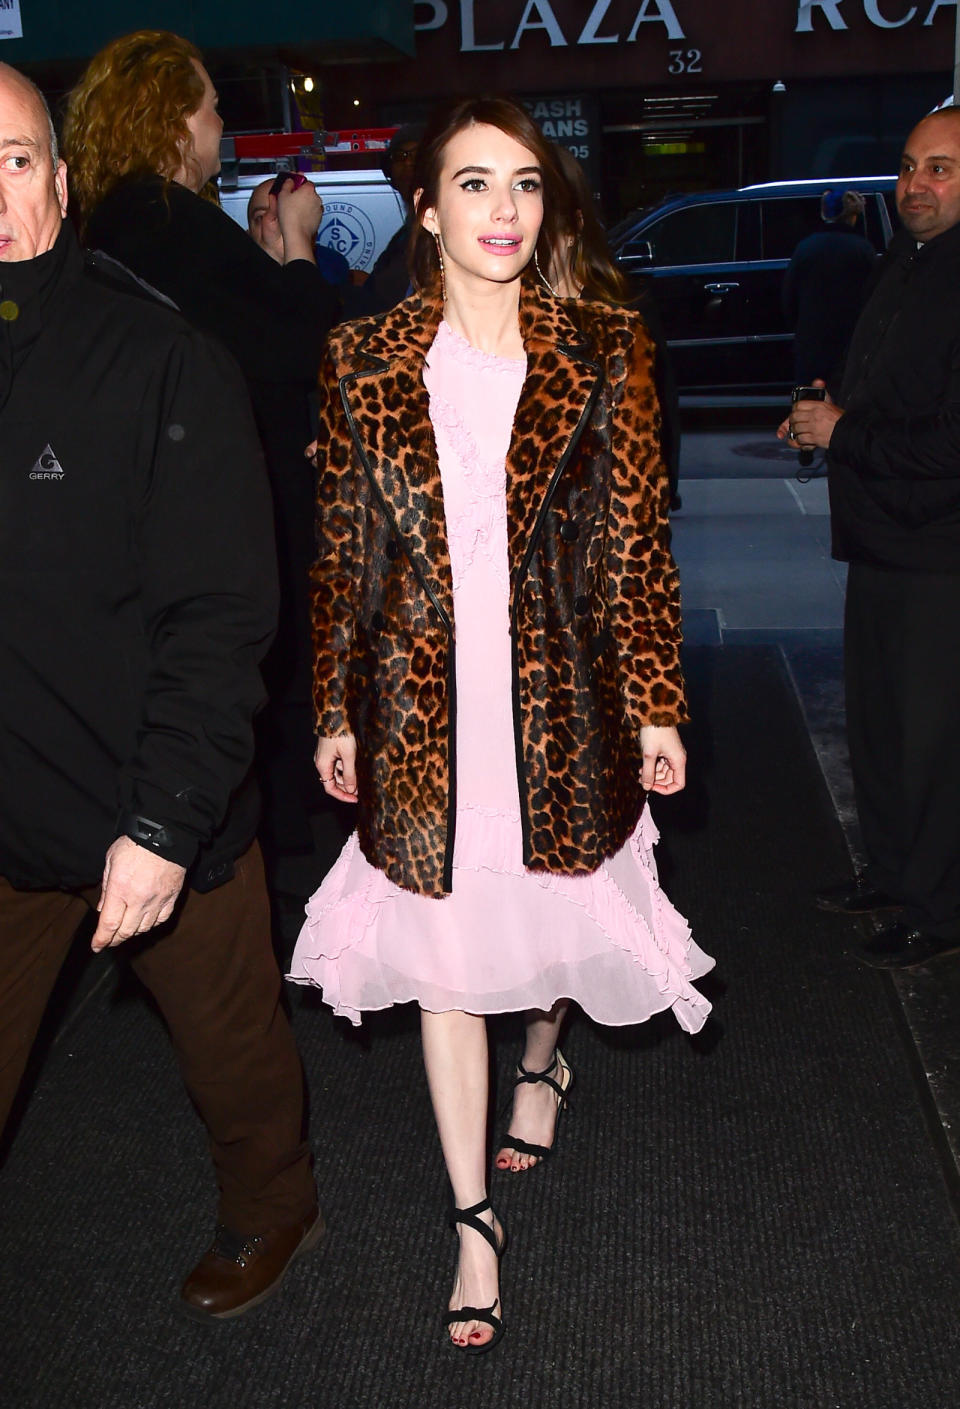 <p>Who: Emma Roberts</p><p>When: March 23, 2017</p><p>What: Veronia Beard coat, Alexandre Birman heels.</p><p>Why: In a frilly pink dress and sharp leopard coat Emma Roberts proves that you don't have to choose sides when your wardrobe is concerned. Mix hard and soft styles to create a quintessential New York City look. </p>